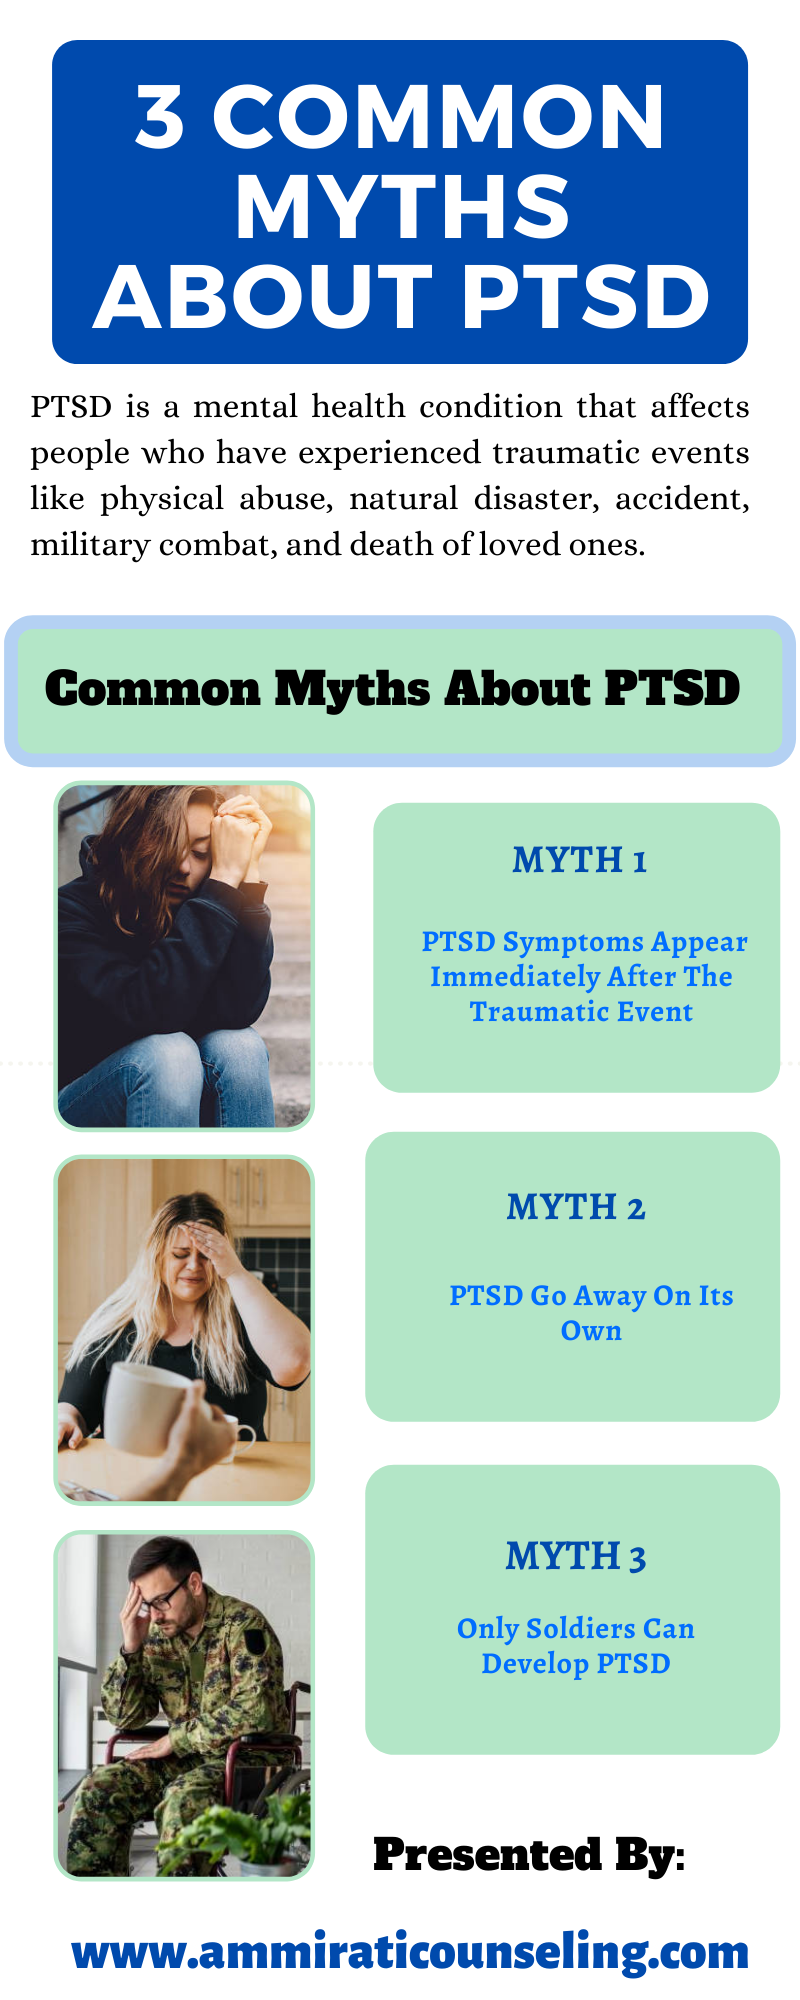 3 Common Myths About PTSD